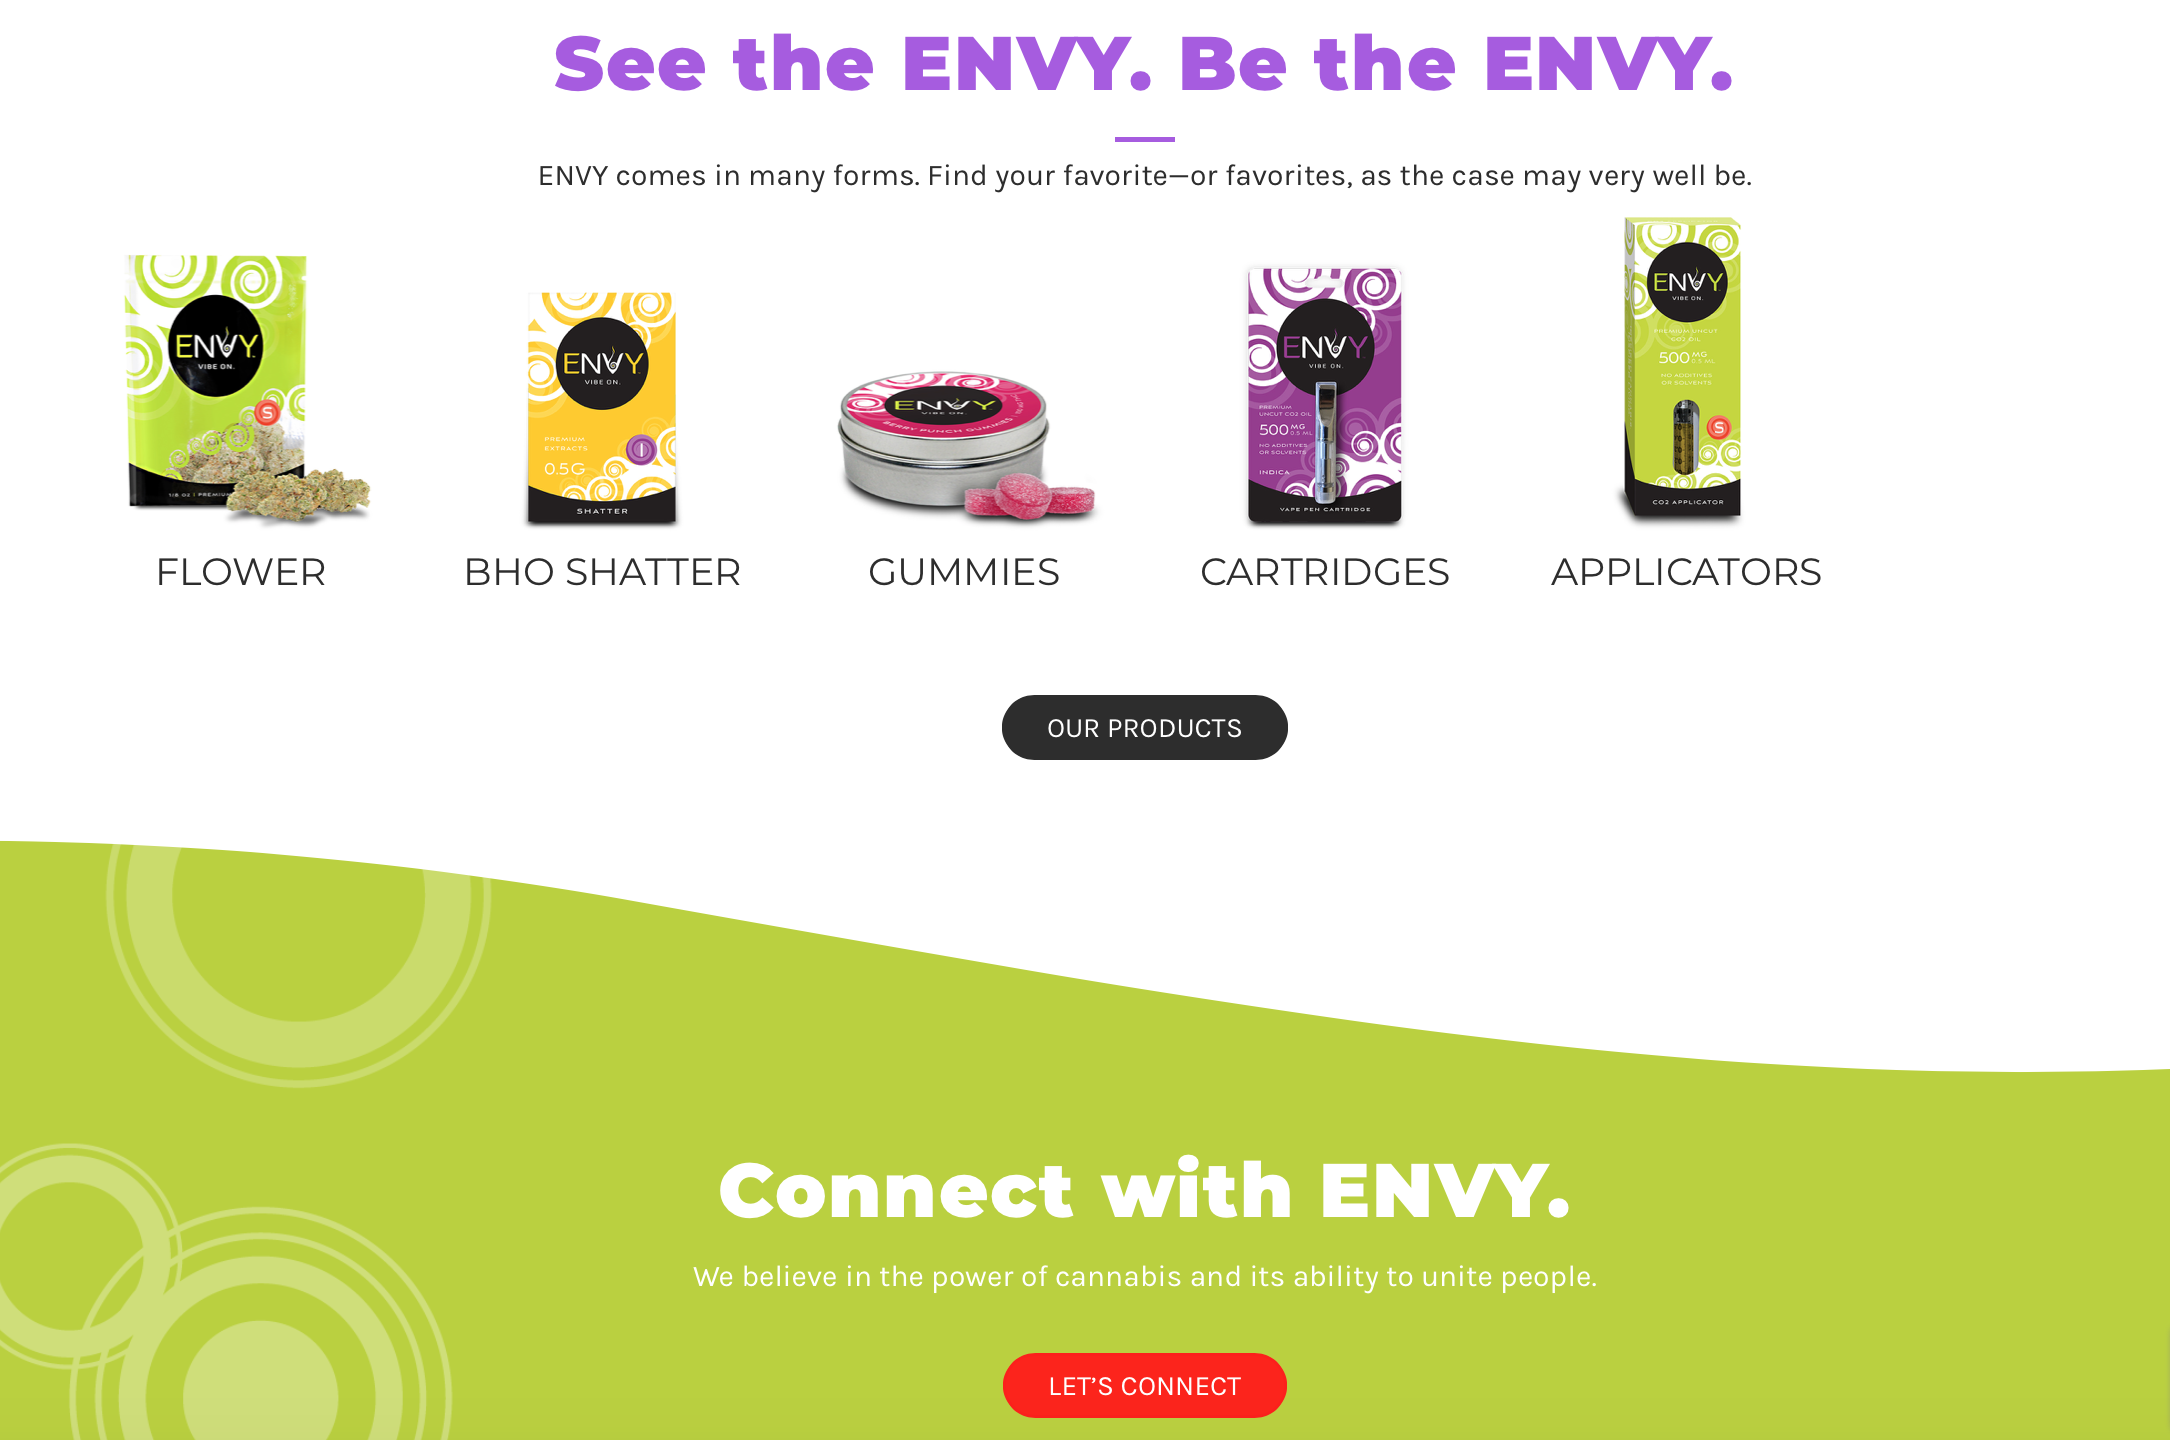 ENVY cannabis products